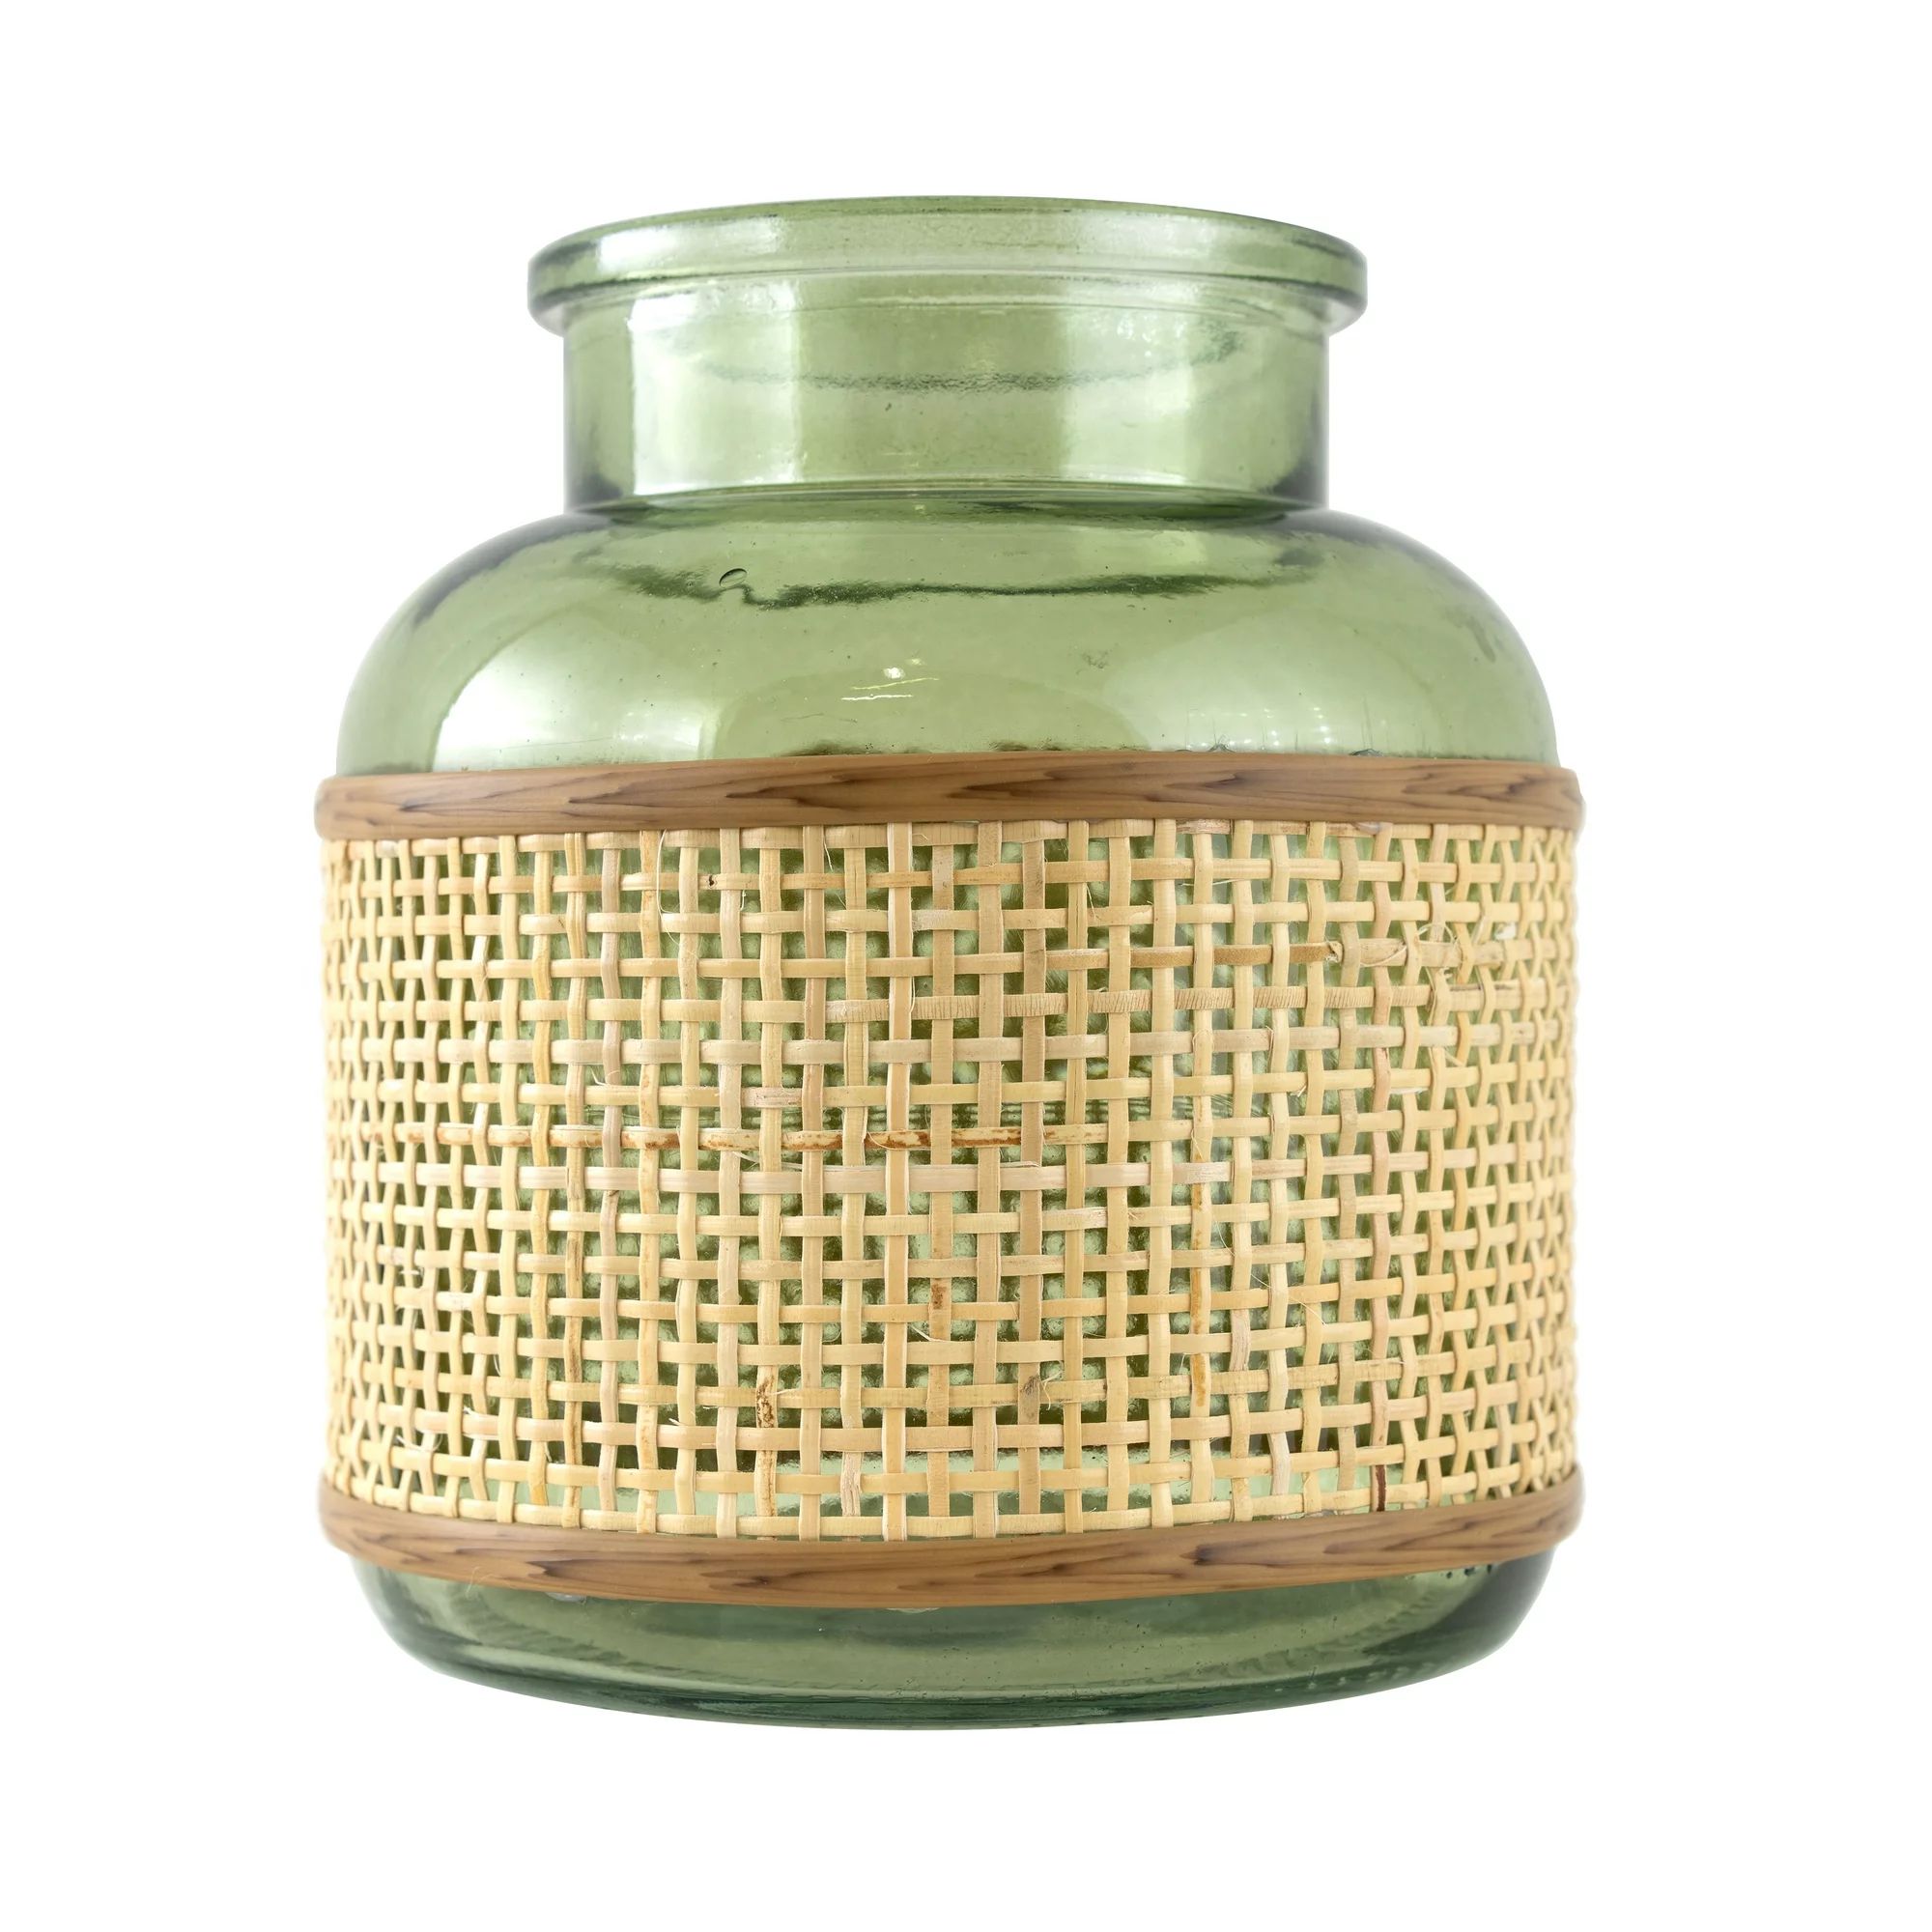 6" Green Translucent Glass Indoor Tabletop Vase with Natural Rattan Caning Wrap | Walmart (US)